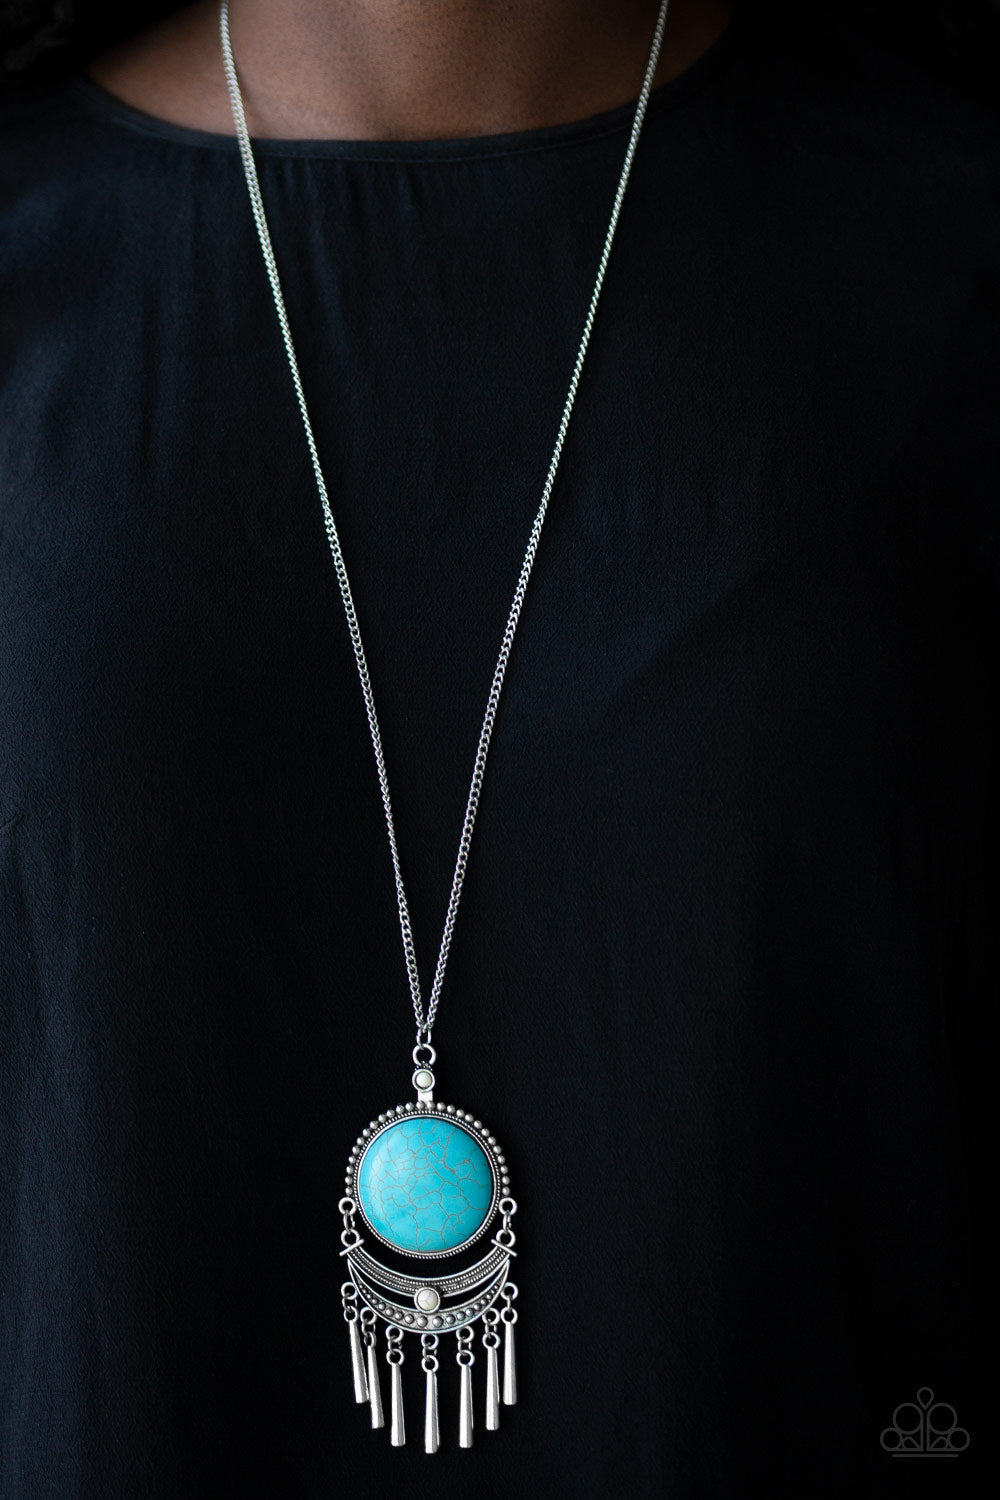 Rural Rustler Blue Turquoise Necklace